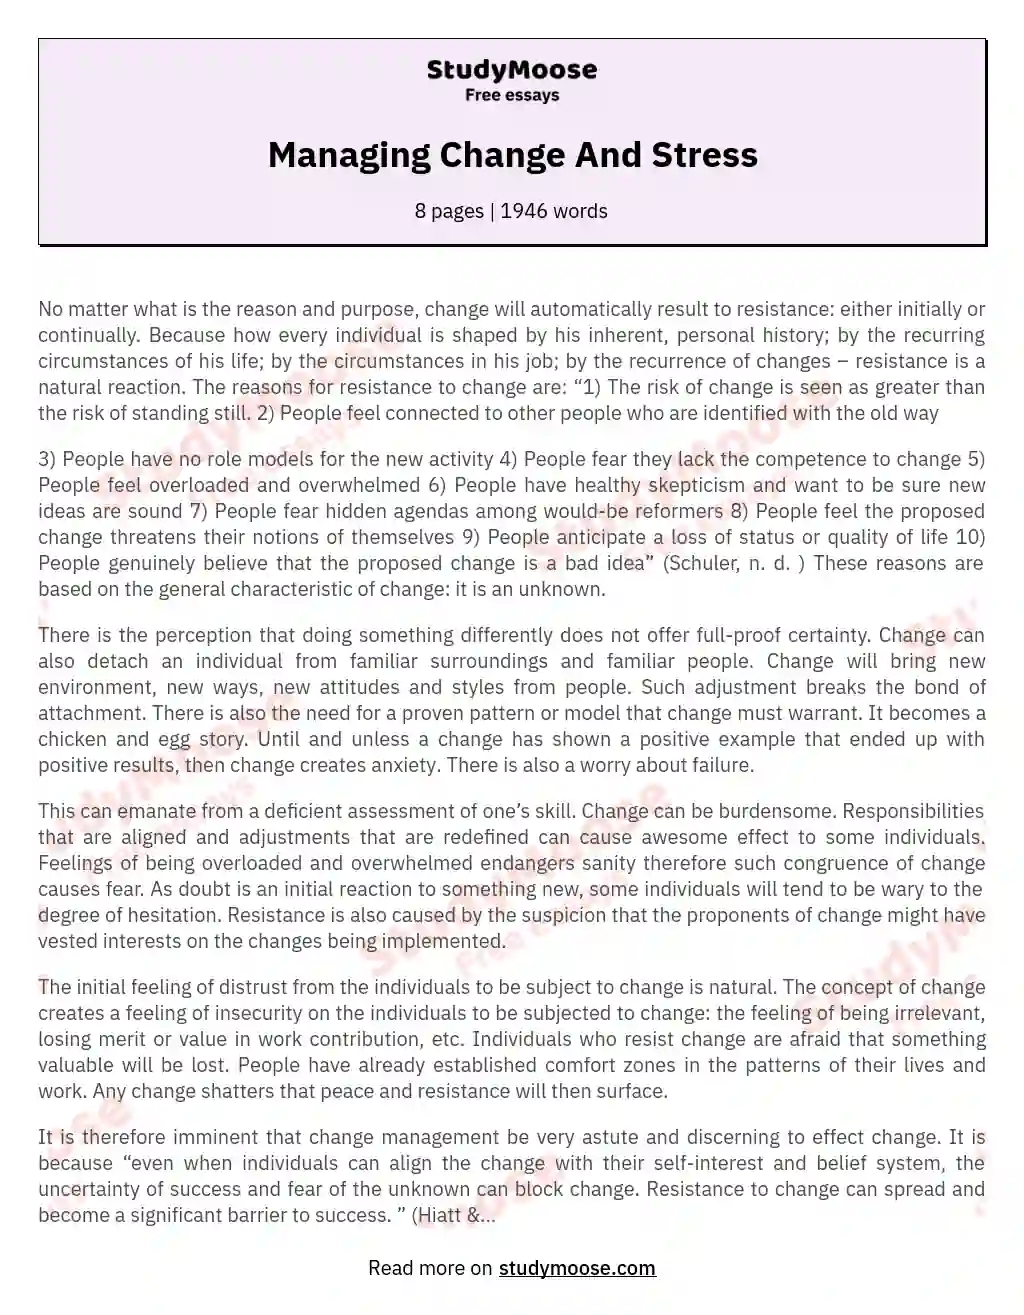 Managing Change And Stress essay